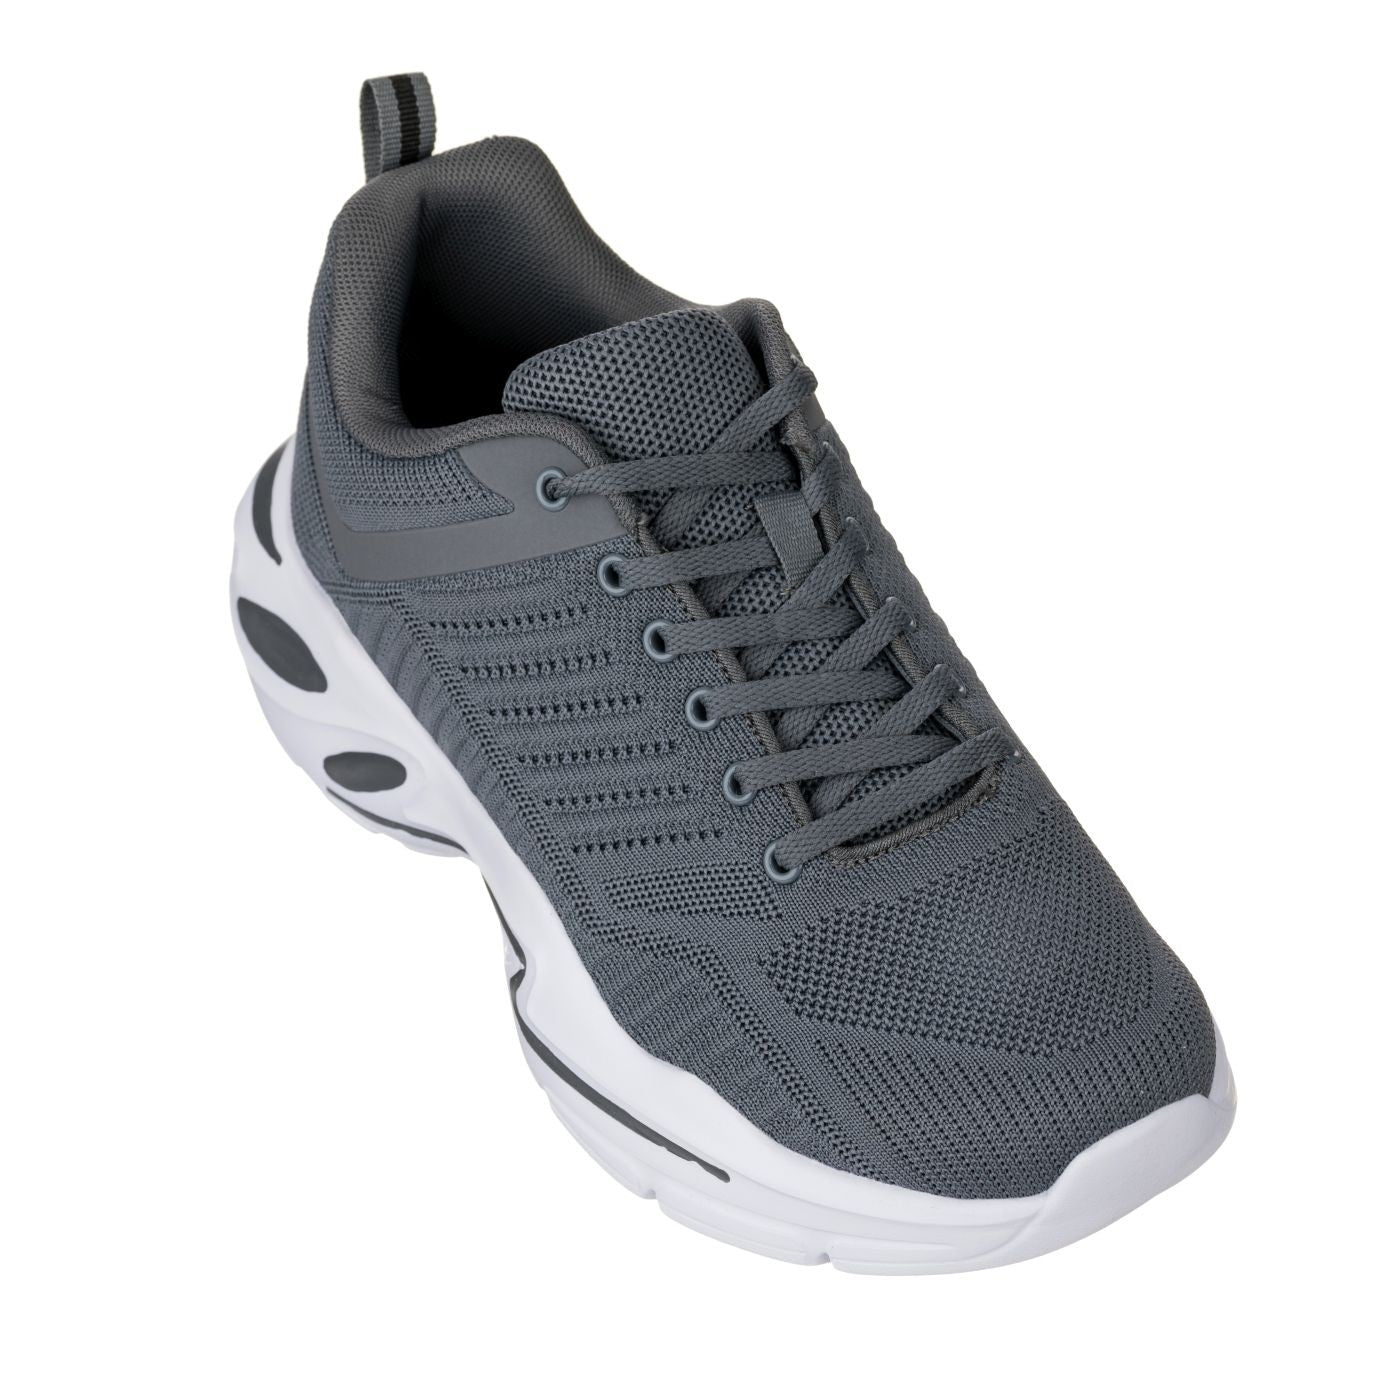 Elevator shoes height increase CALTO - Q332 - 2.6 Inches Taller (Grey/White) - Super Lightweight